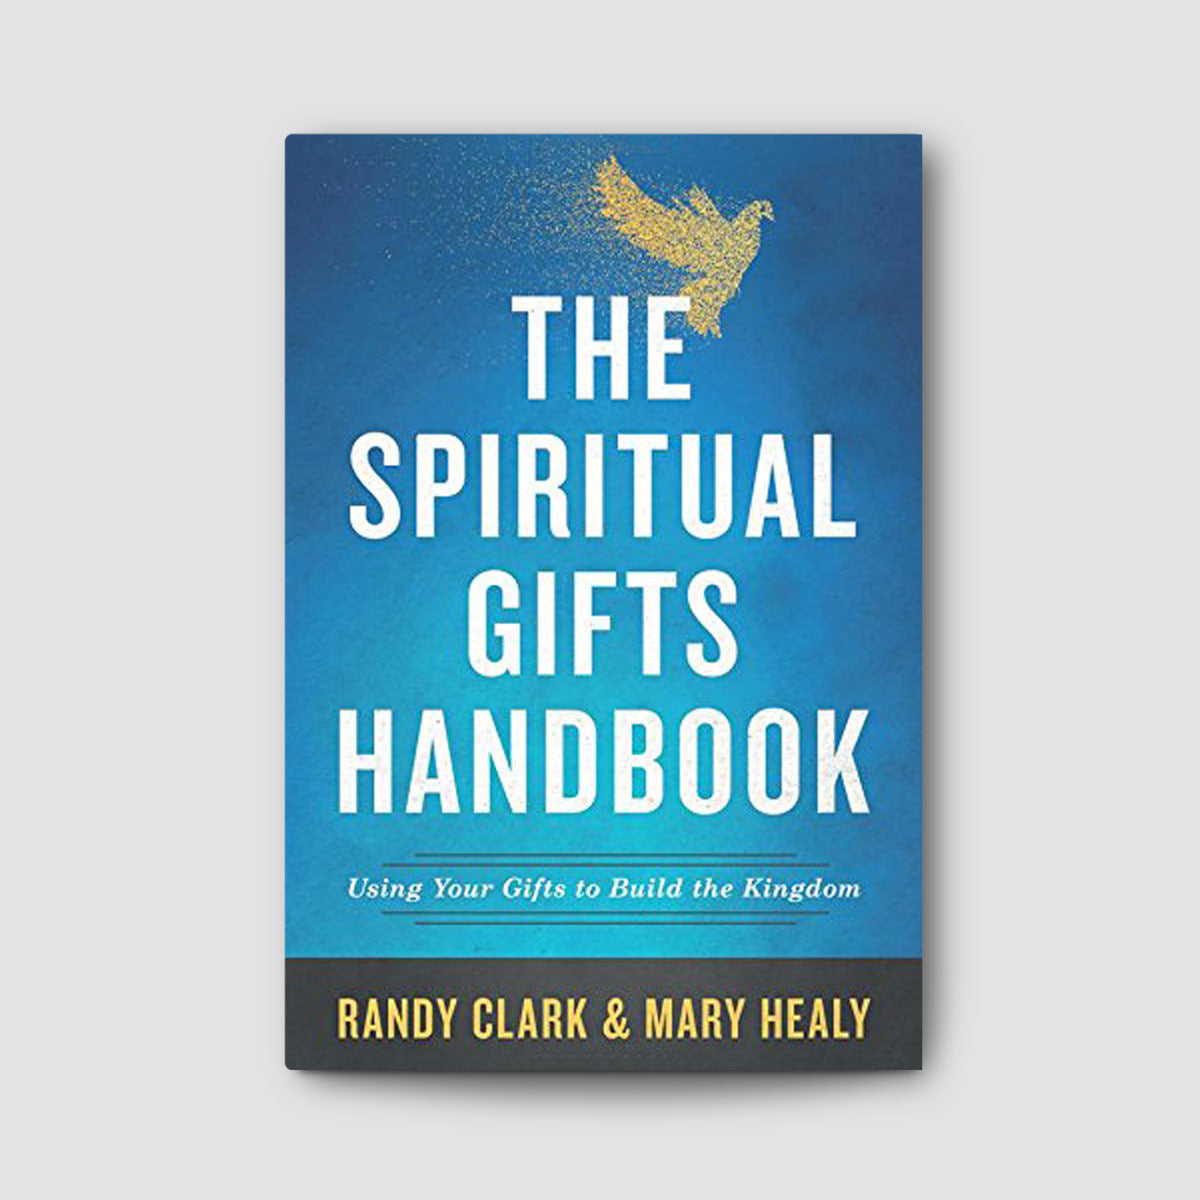 Understanding Spiritual Gifts: A Comprehensive Guide, taught by Sam Storms  - YouTube